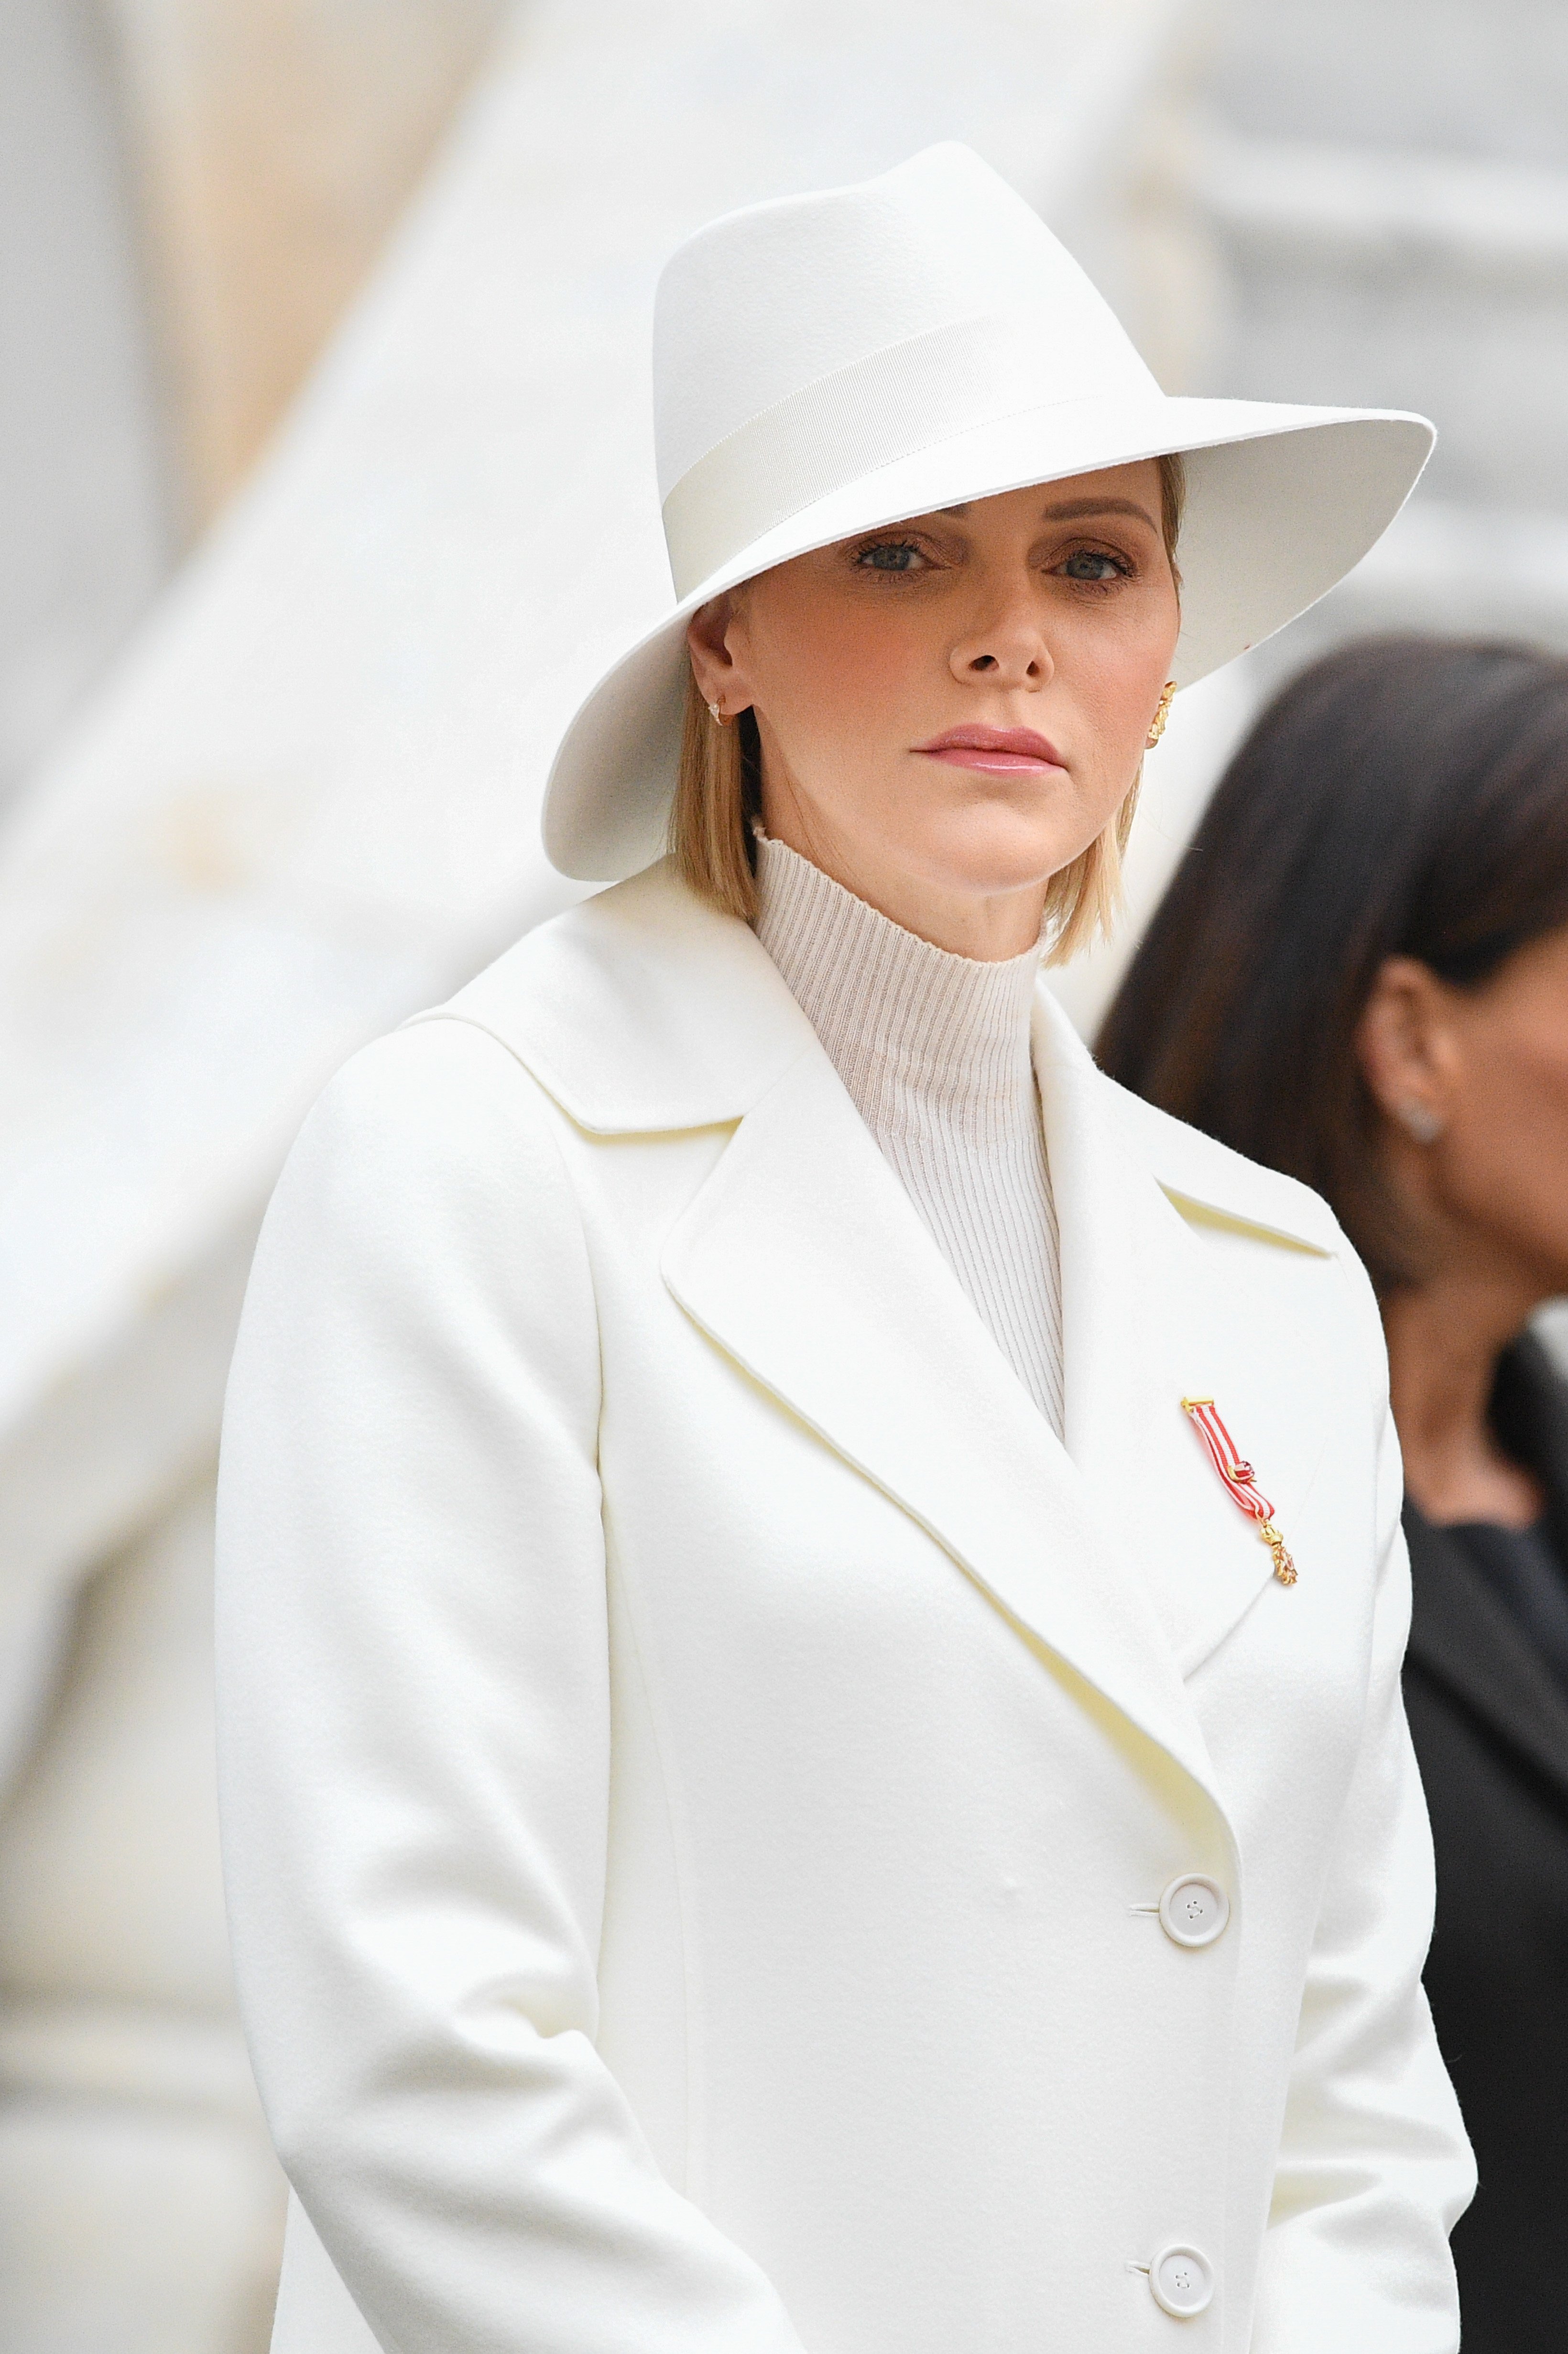 Princess Charlene of Monaco attends the celebrations marking Monaco's National Day at the Monaco Palace in Monaco, 19 November 2019 | Source: Getty Images